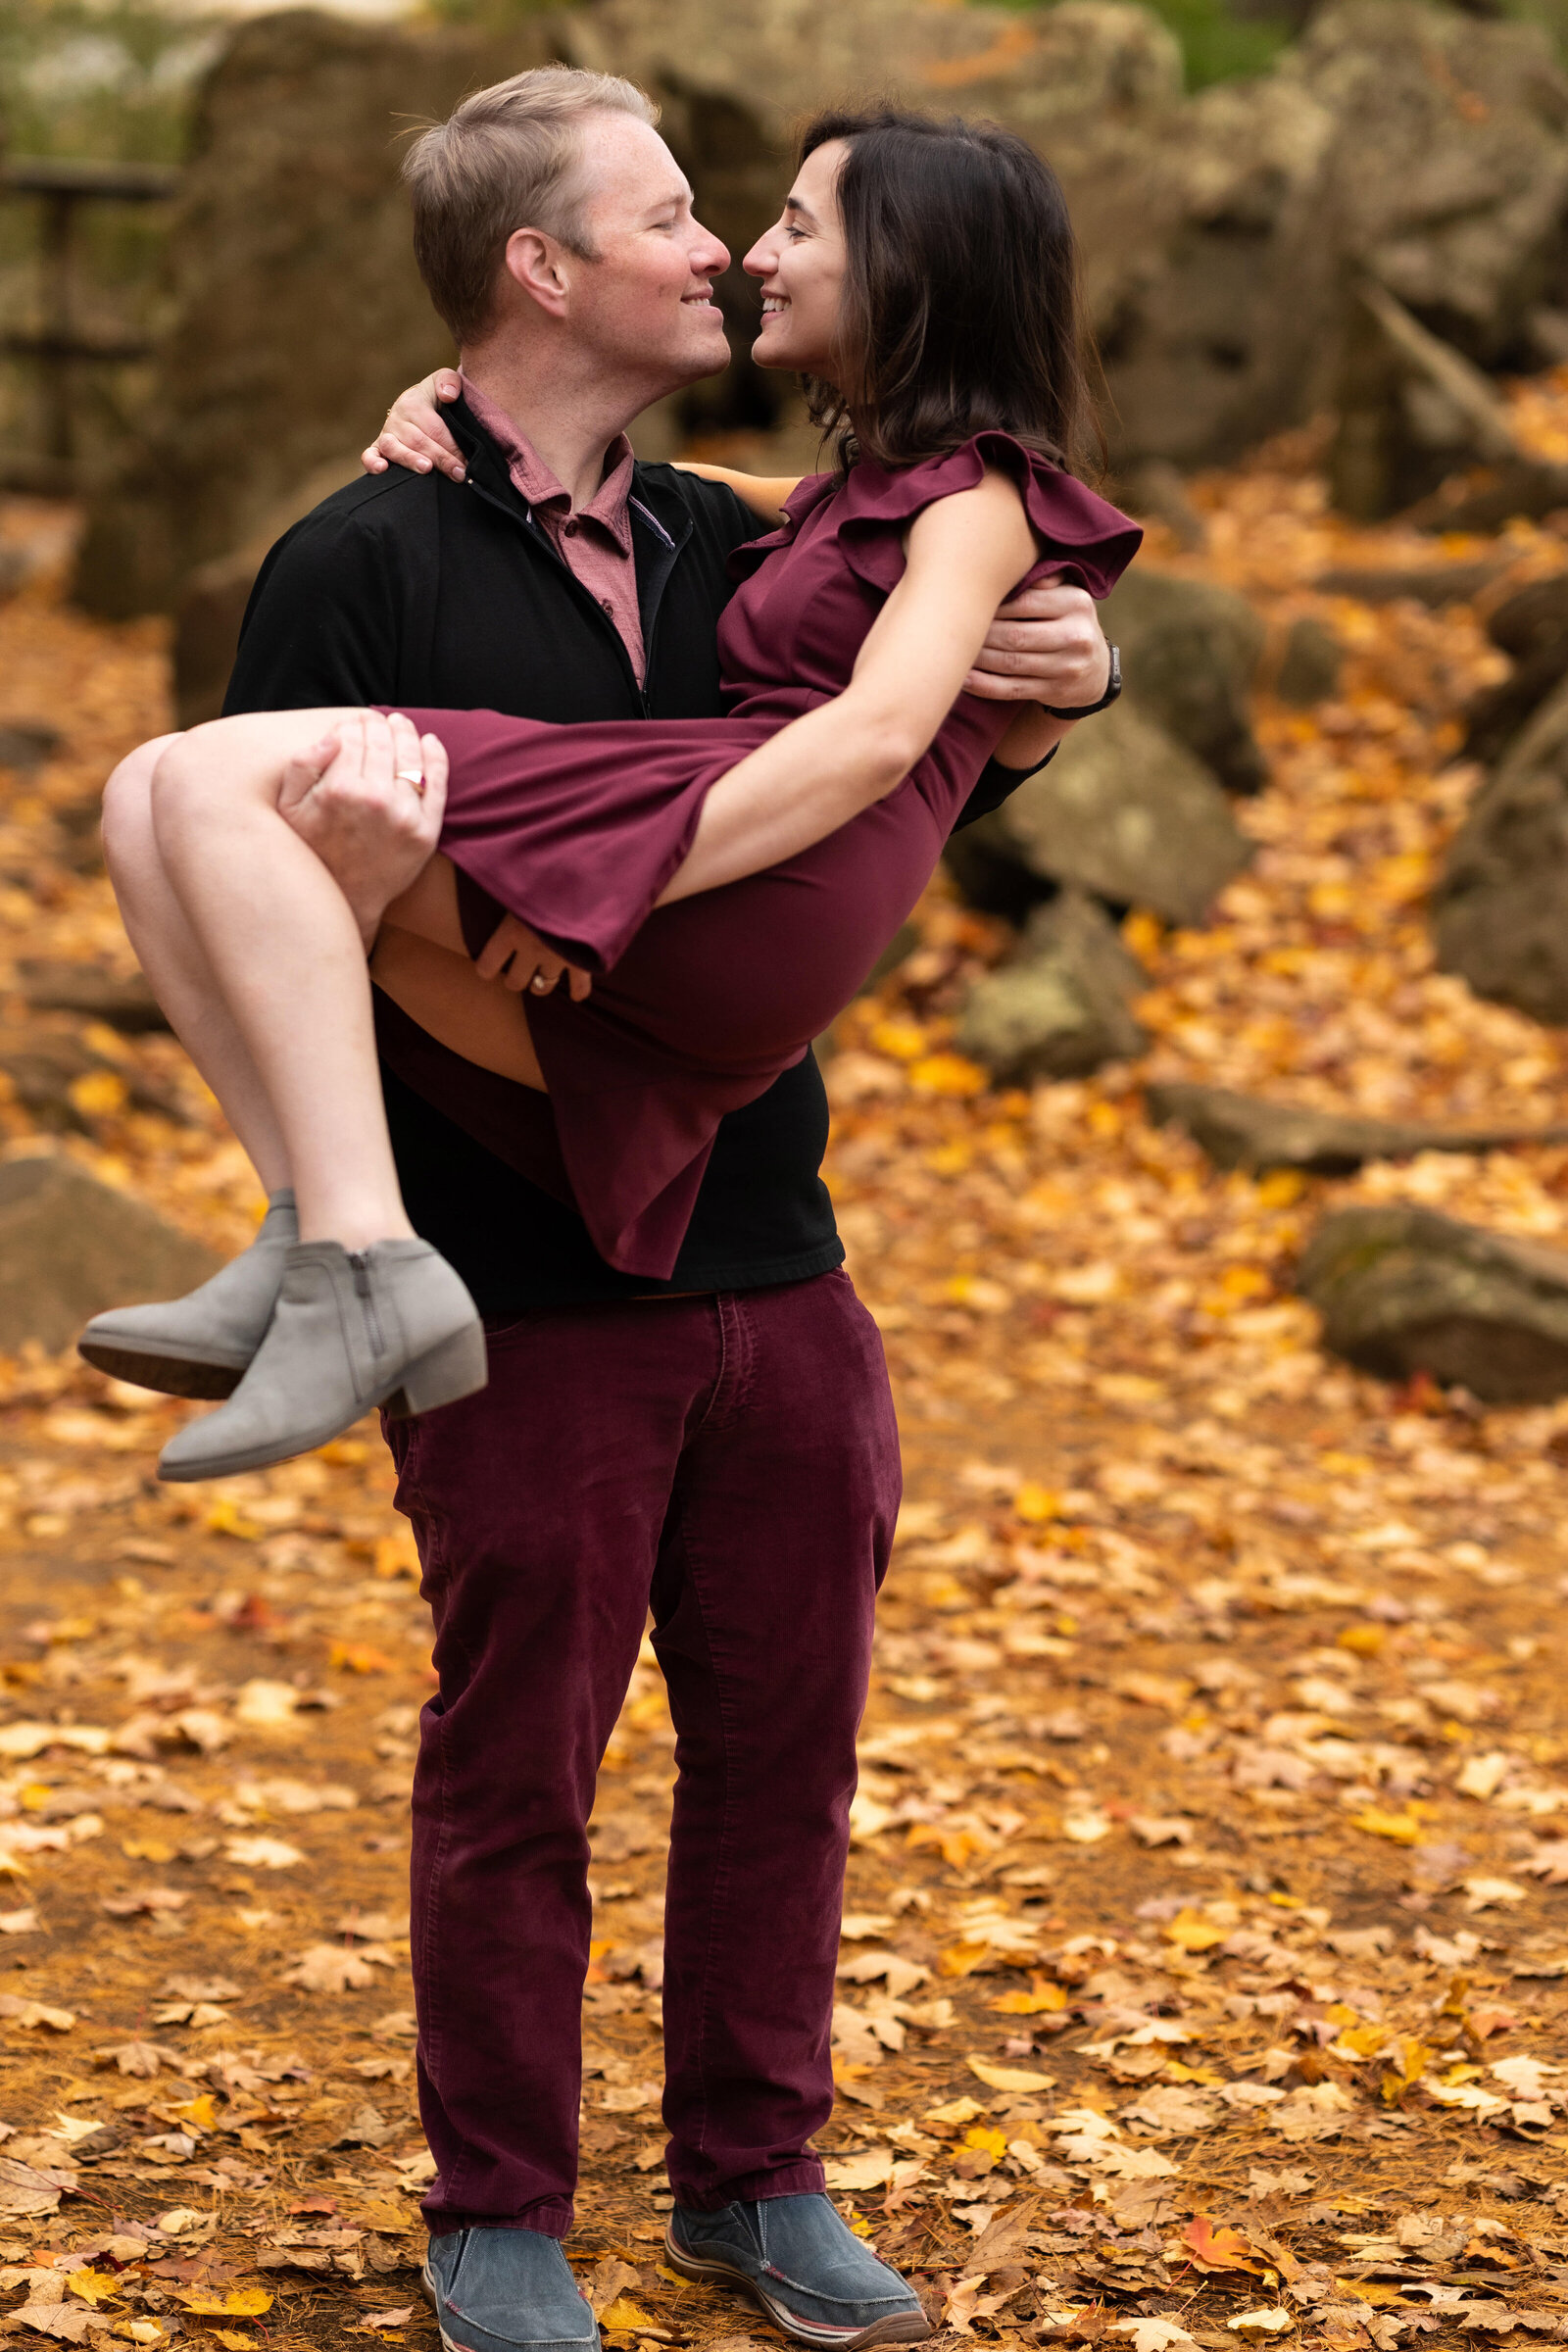 Man lifts and kisses woman in purple dress surrounded by leaves.